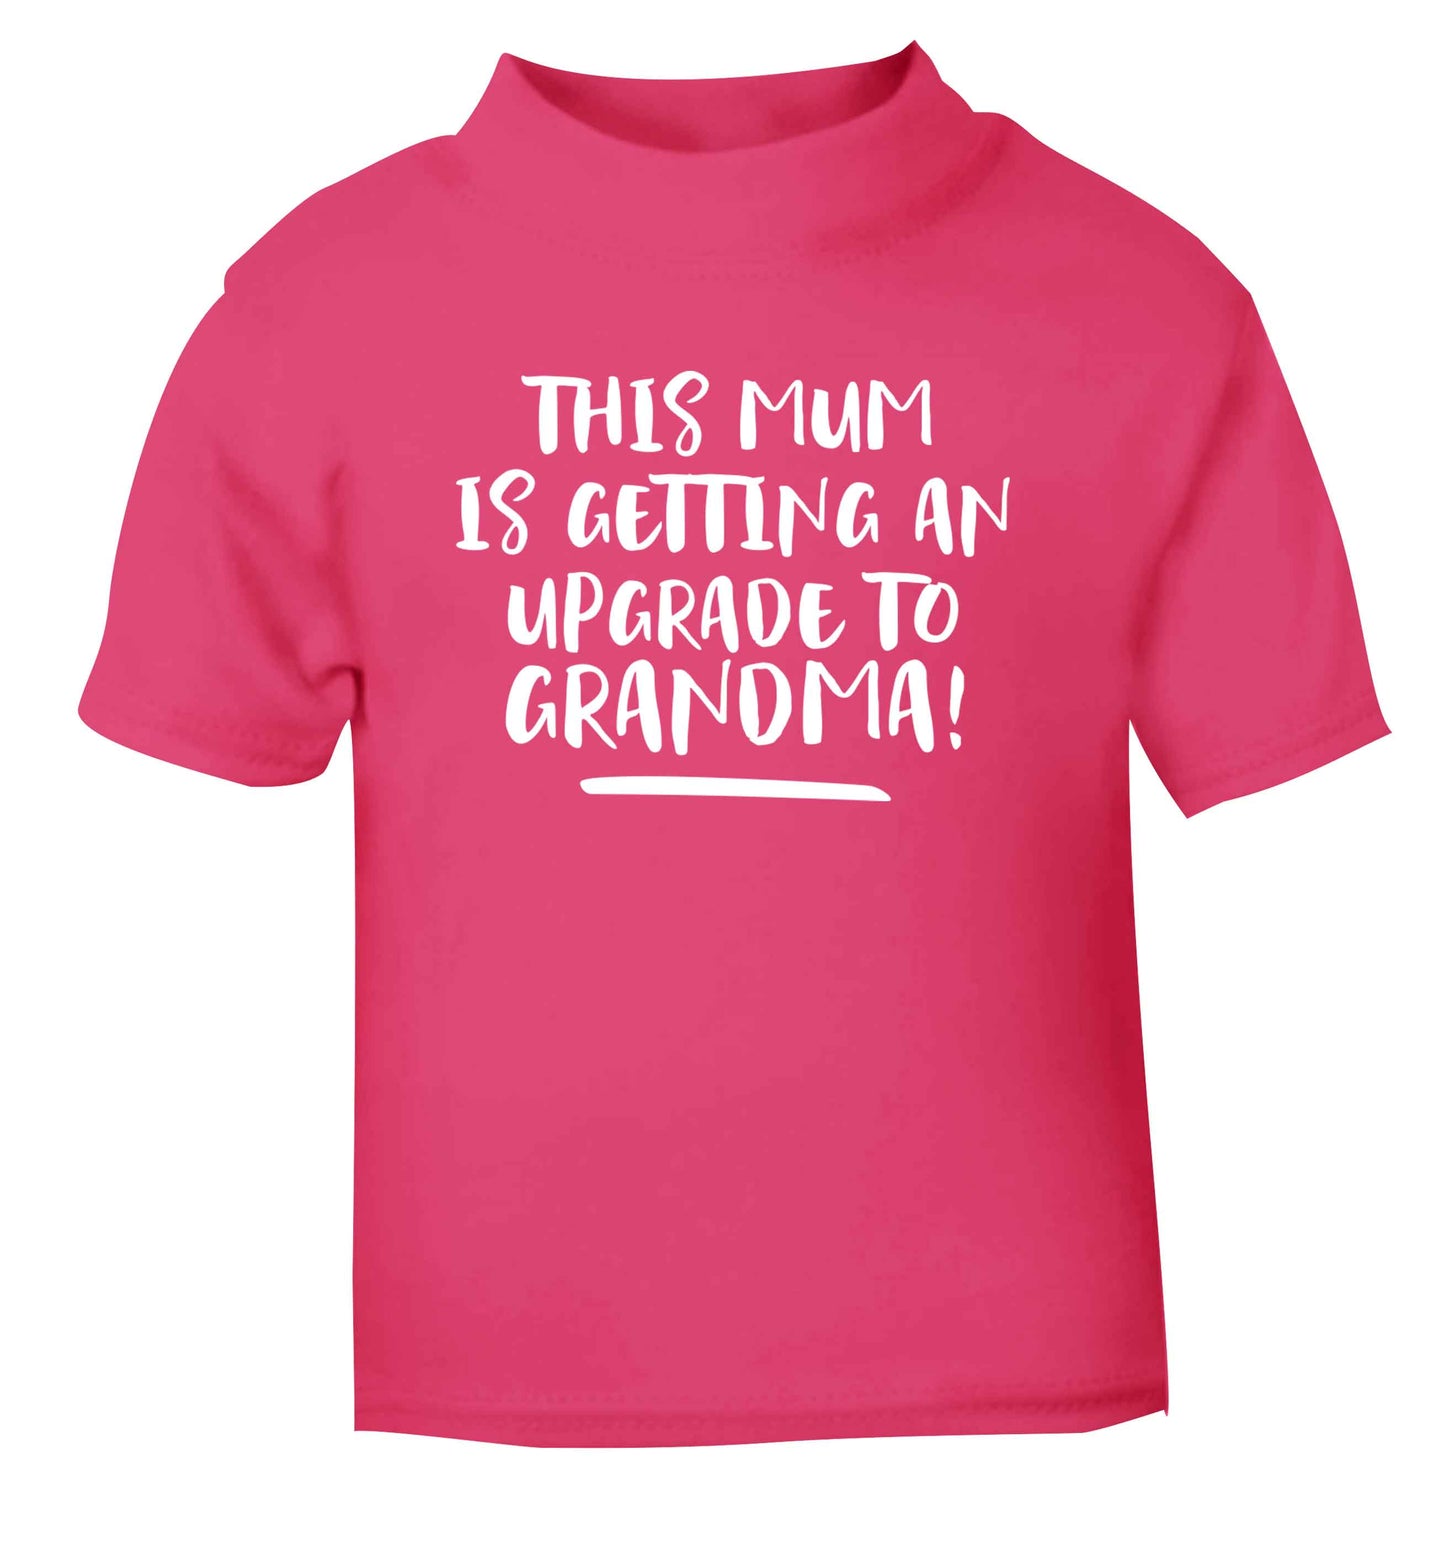 This mum is getting an upgrade to grandma! pink Baby Toddler Tshirt 2 Years